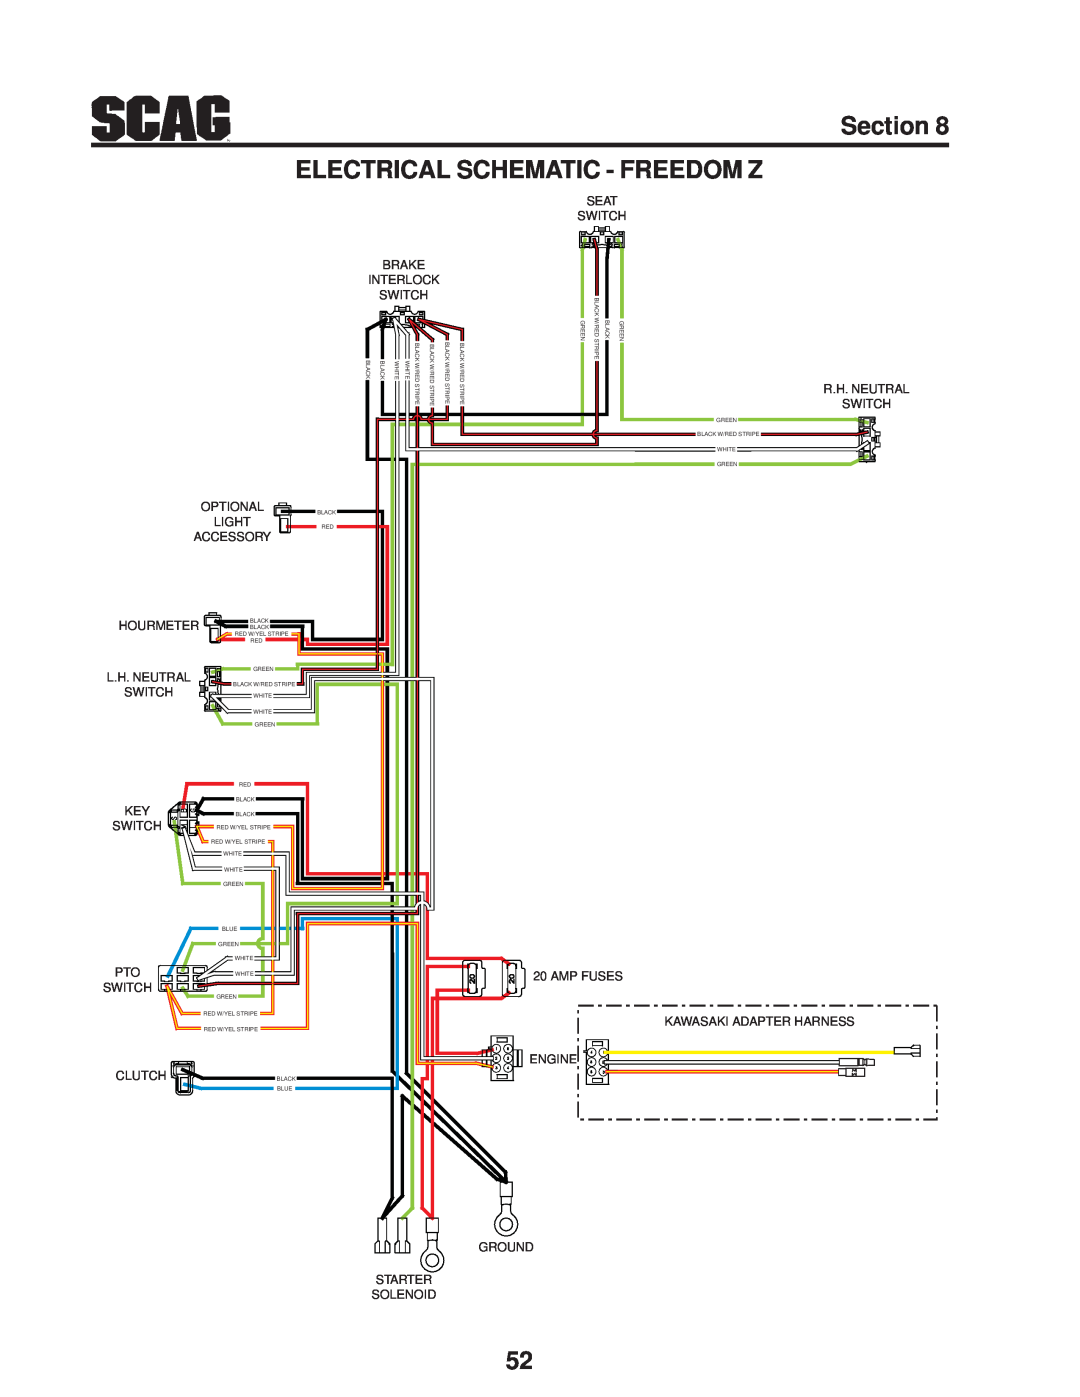 Scag Power Equipment SFZ manual Section ELECTRICAL SCHEMATIC - FREEDOM Z, L.H. Neutral 